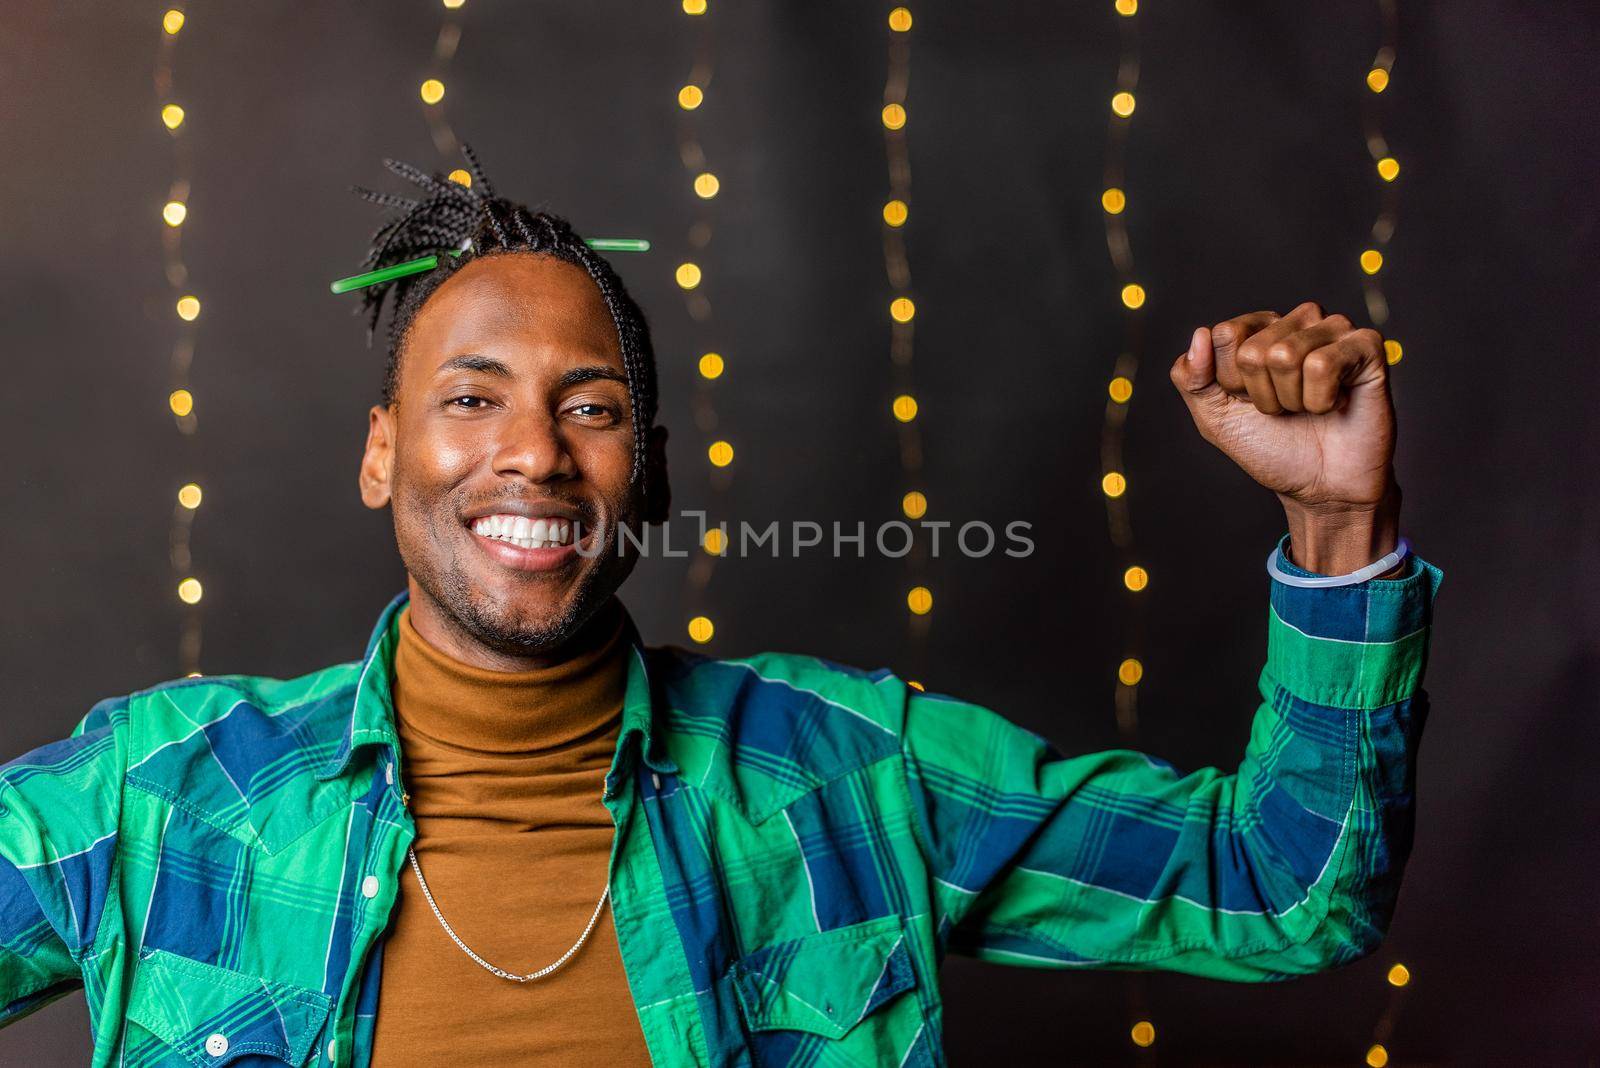 Portrait of a cheerful young African American with braids with clenched fists looking at the camera on a blurred light background.